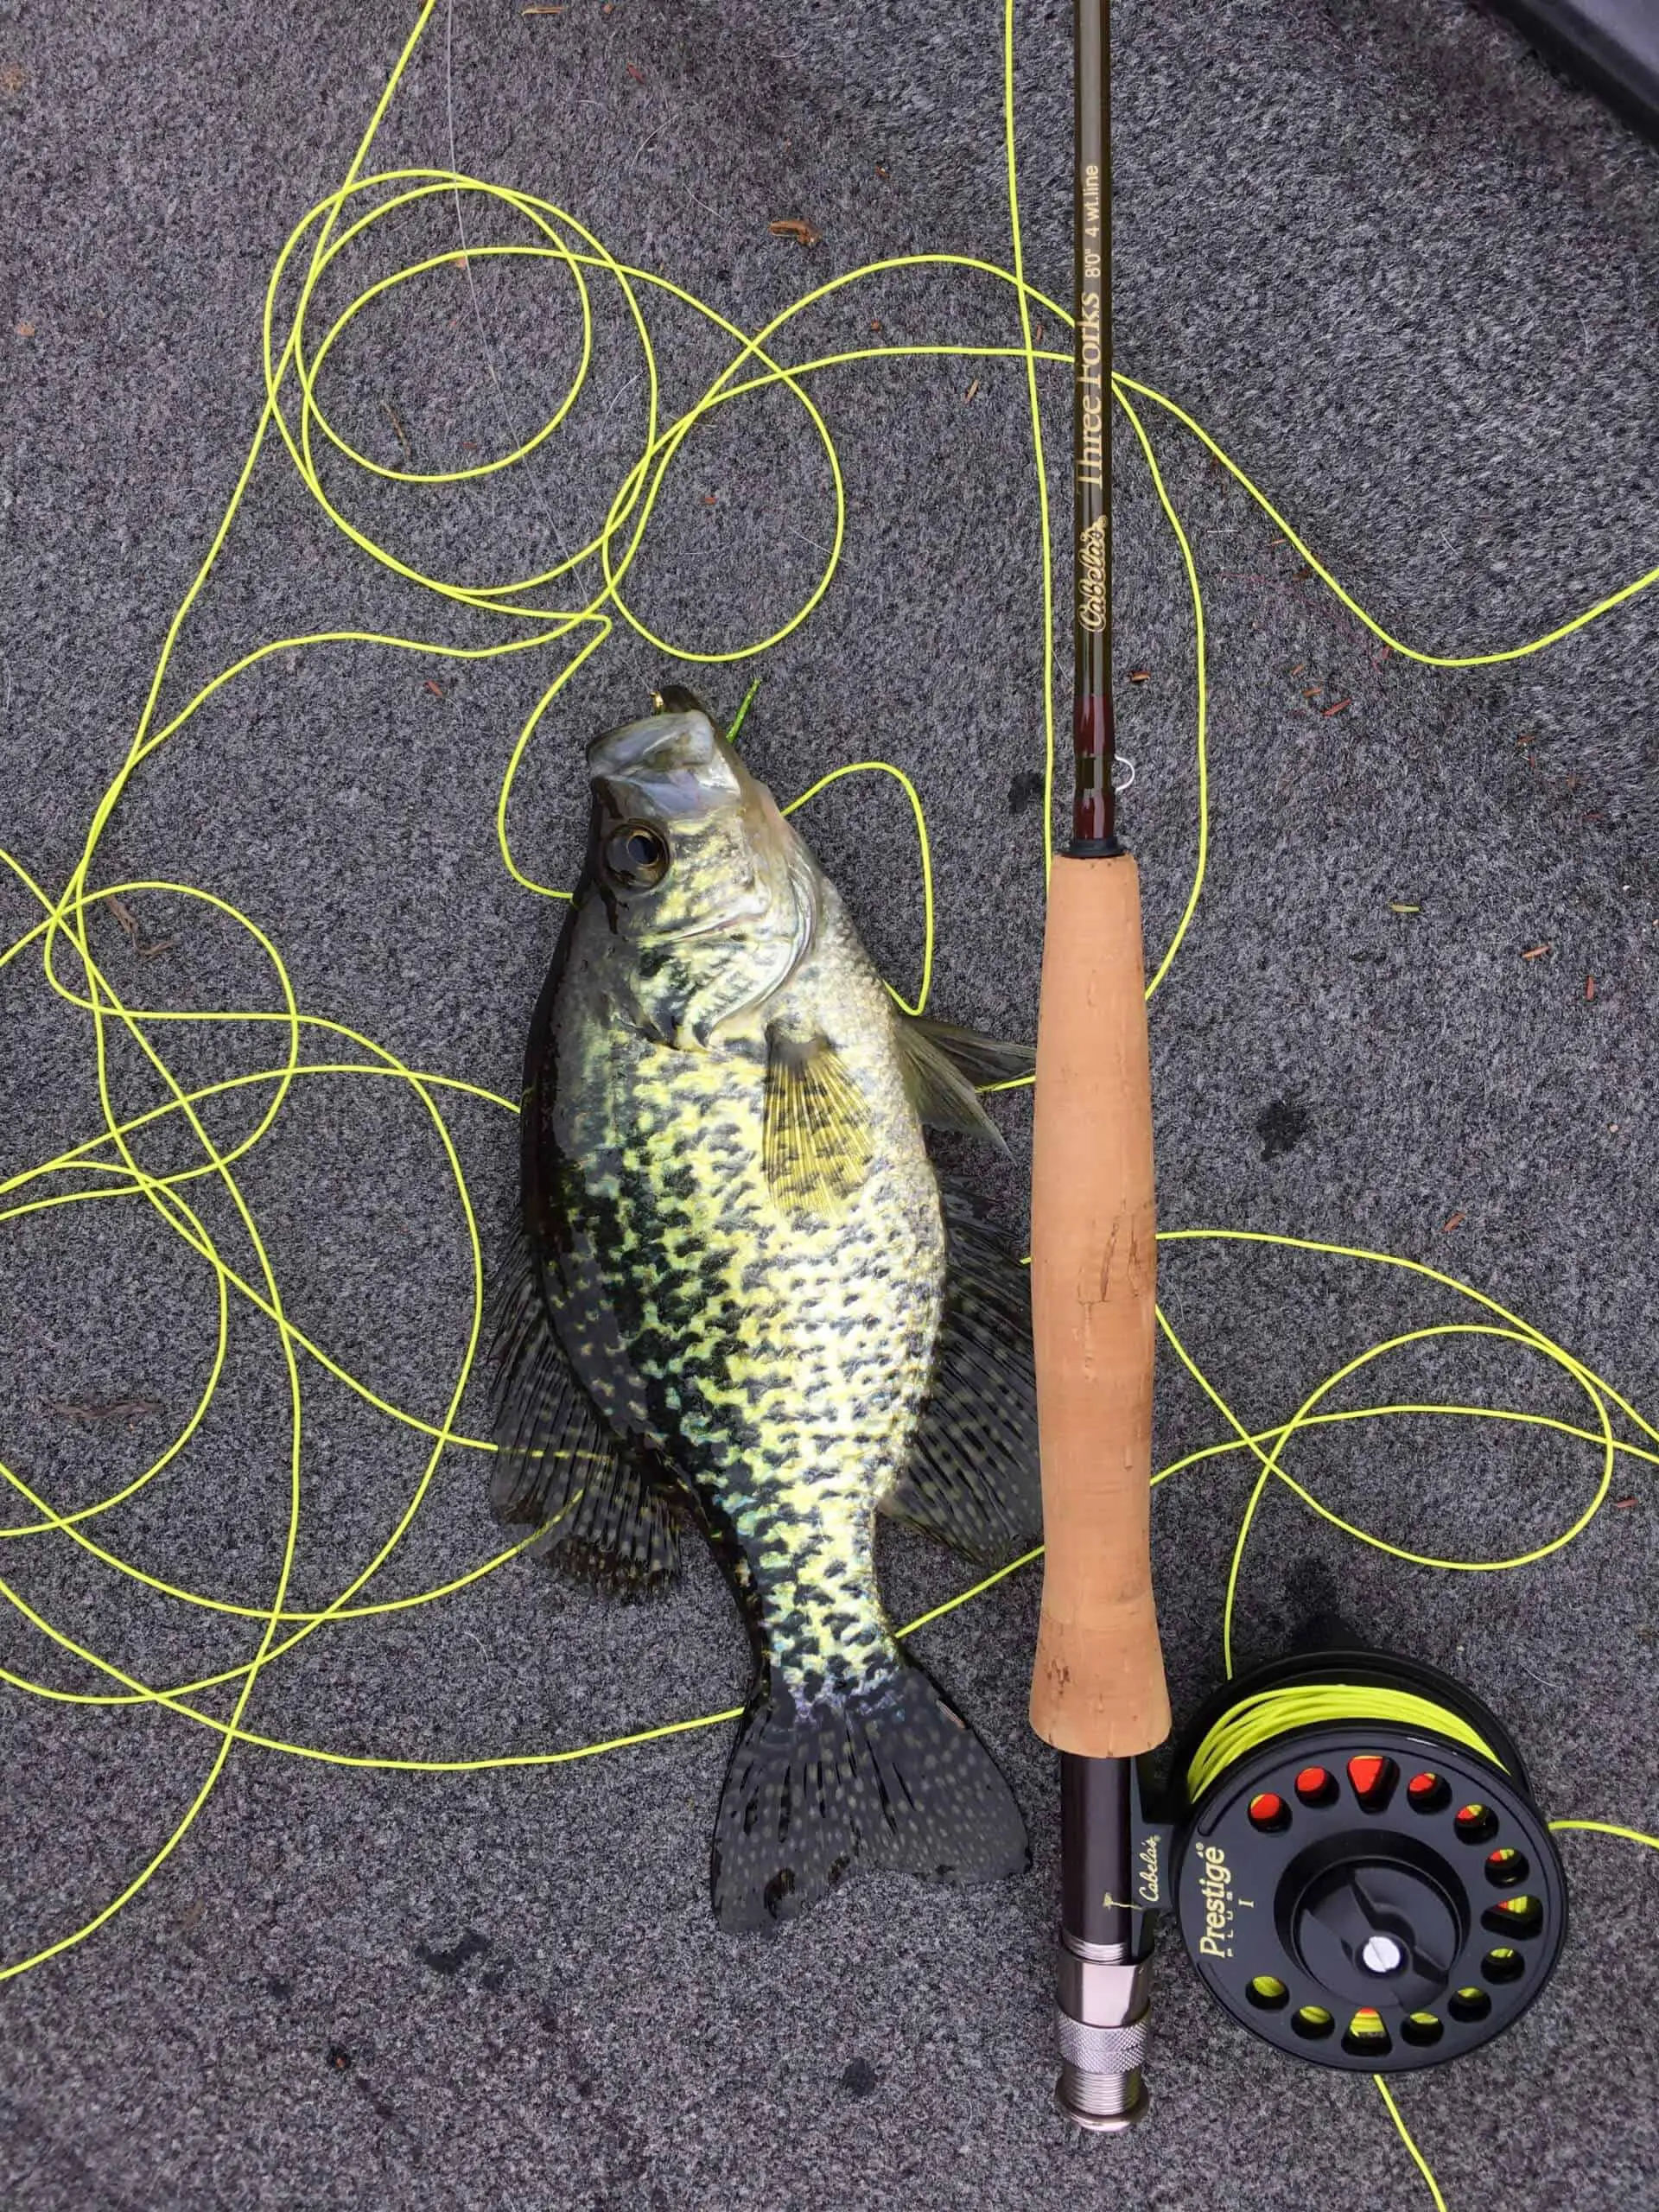 Crappie fishing tips: crappie lying on ground next to cabelas fishing rod and reel